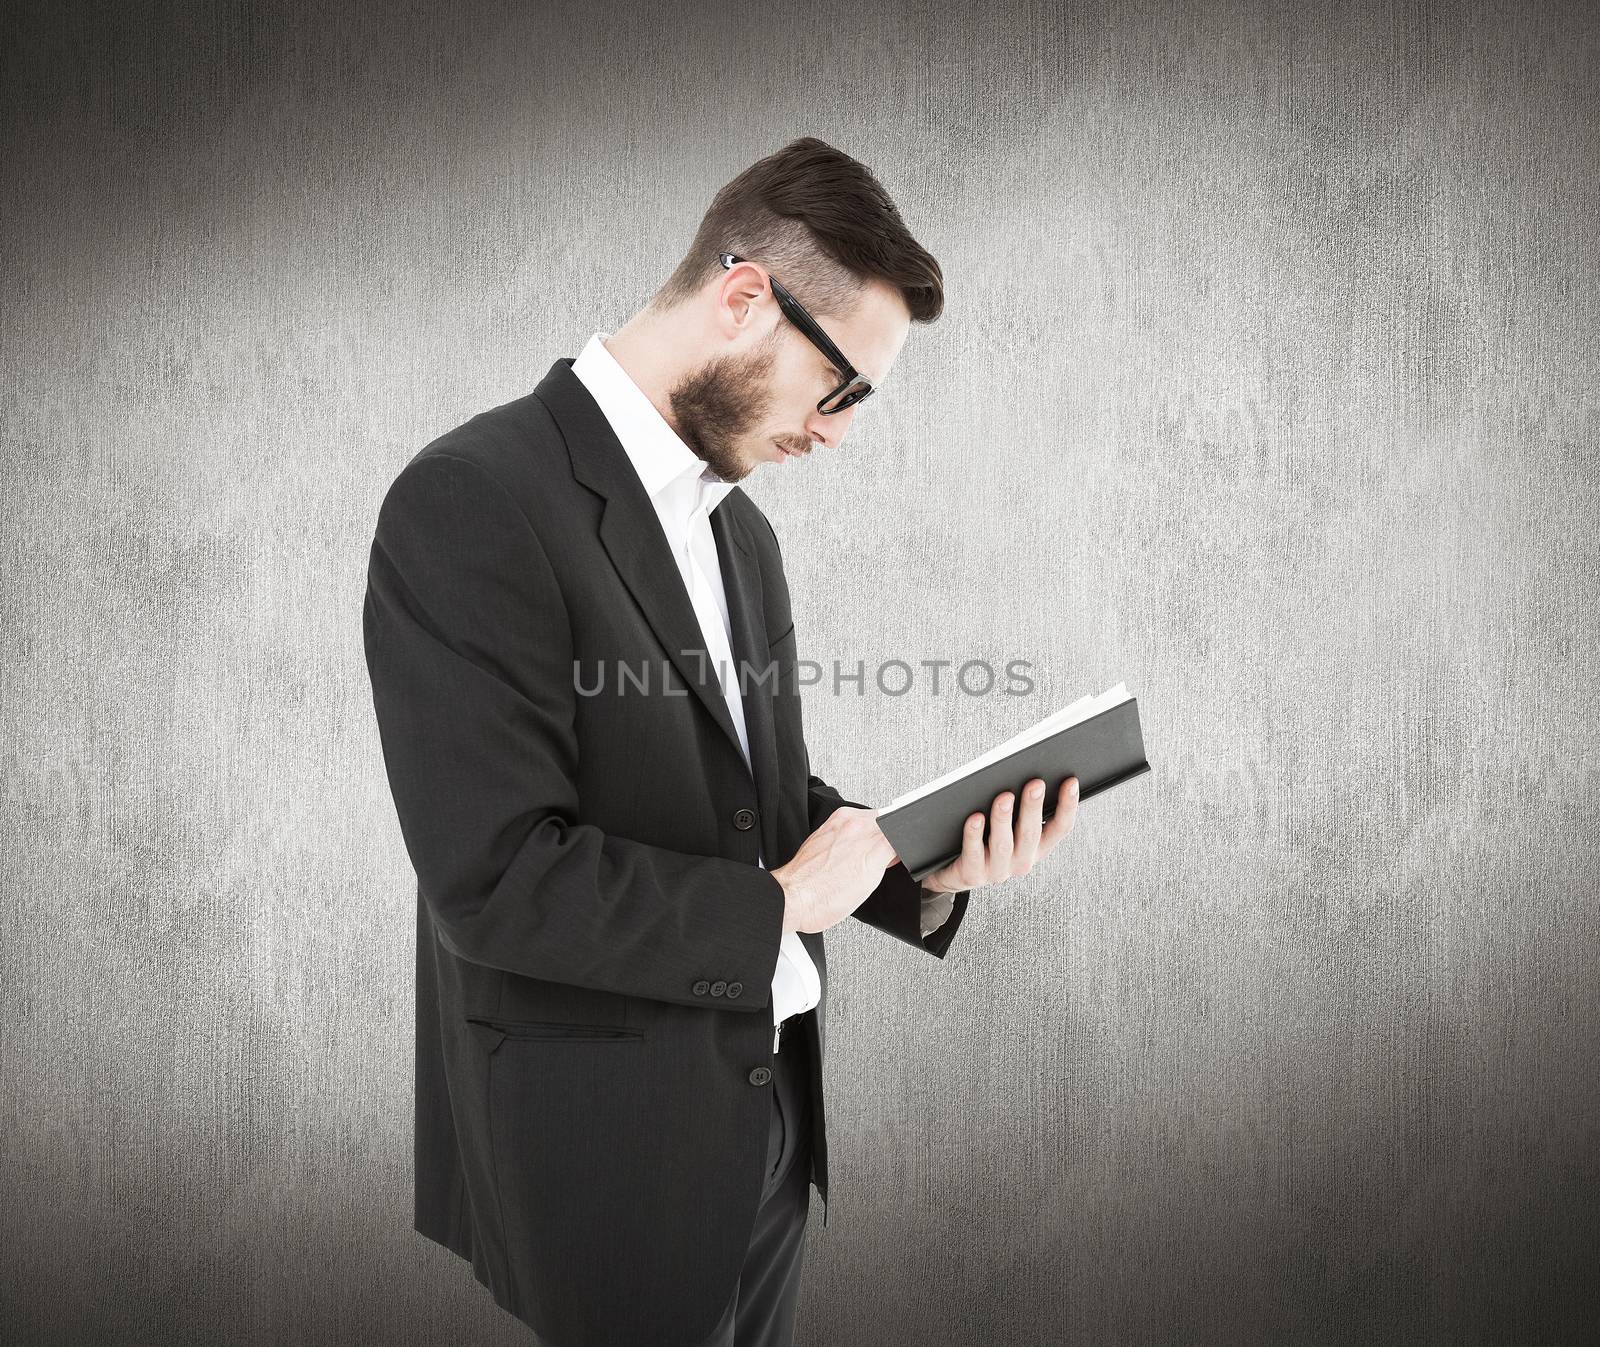 Composite image of geeky young man reading from black book by Wavebreakmedia